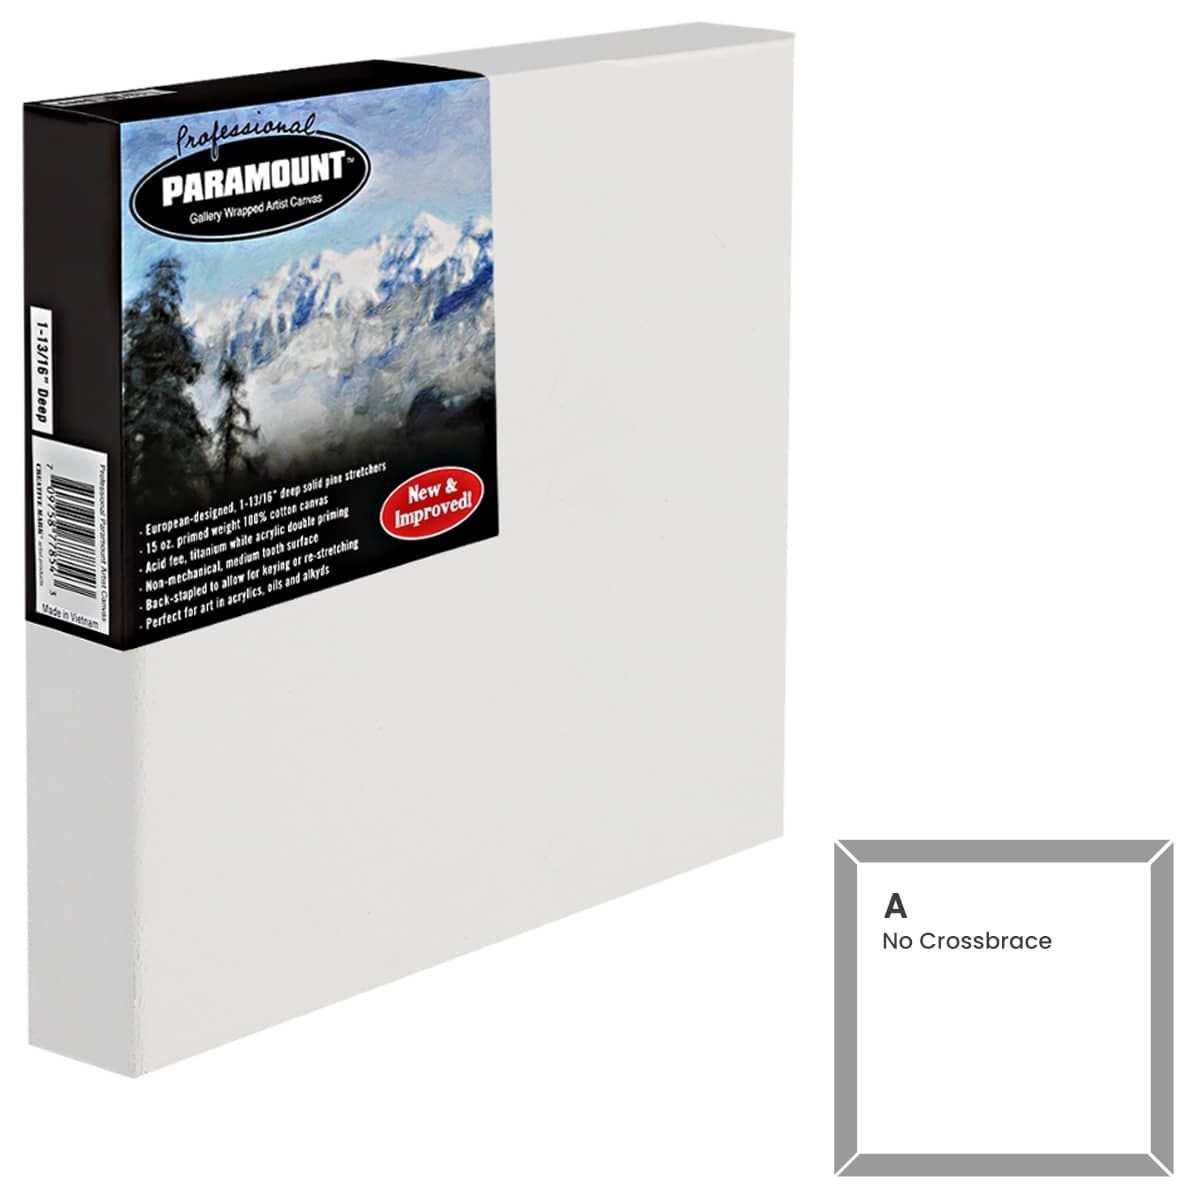 Paramount Professional Gallery Wrap Canvas 10x10